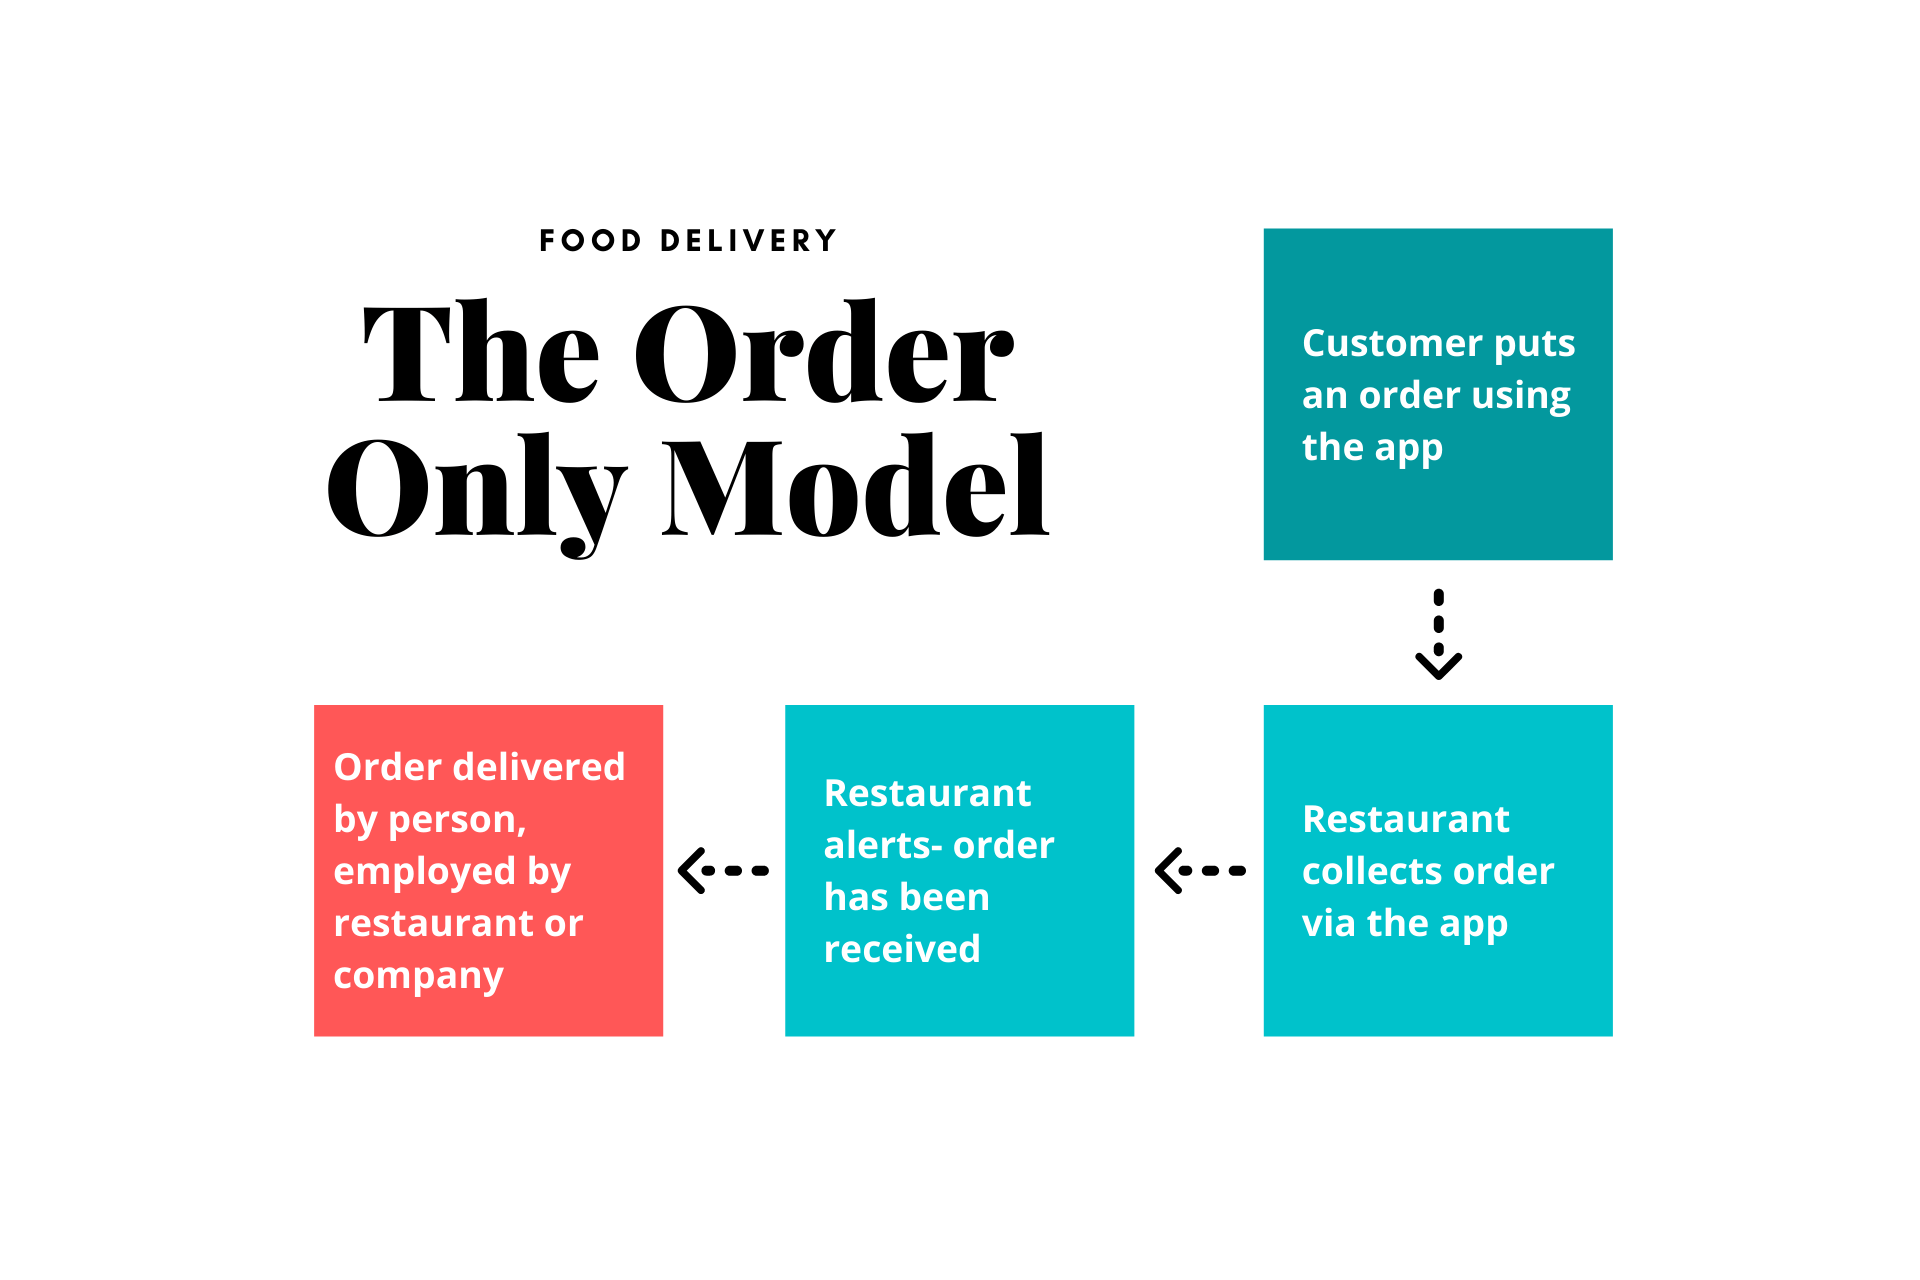 Order-Only Business Model For On-Demand Food Delivery Apps